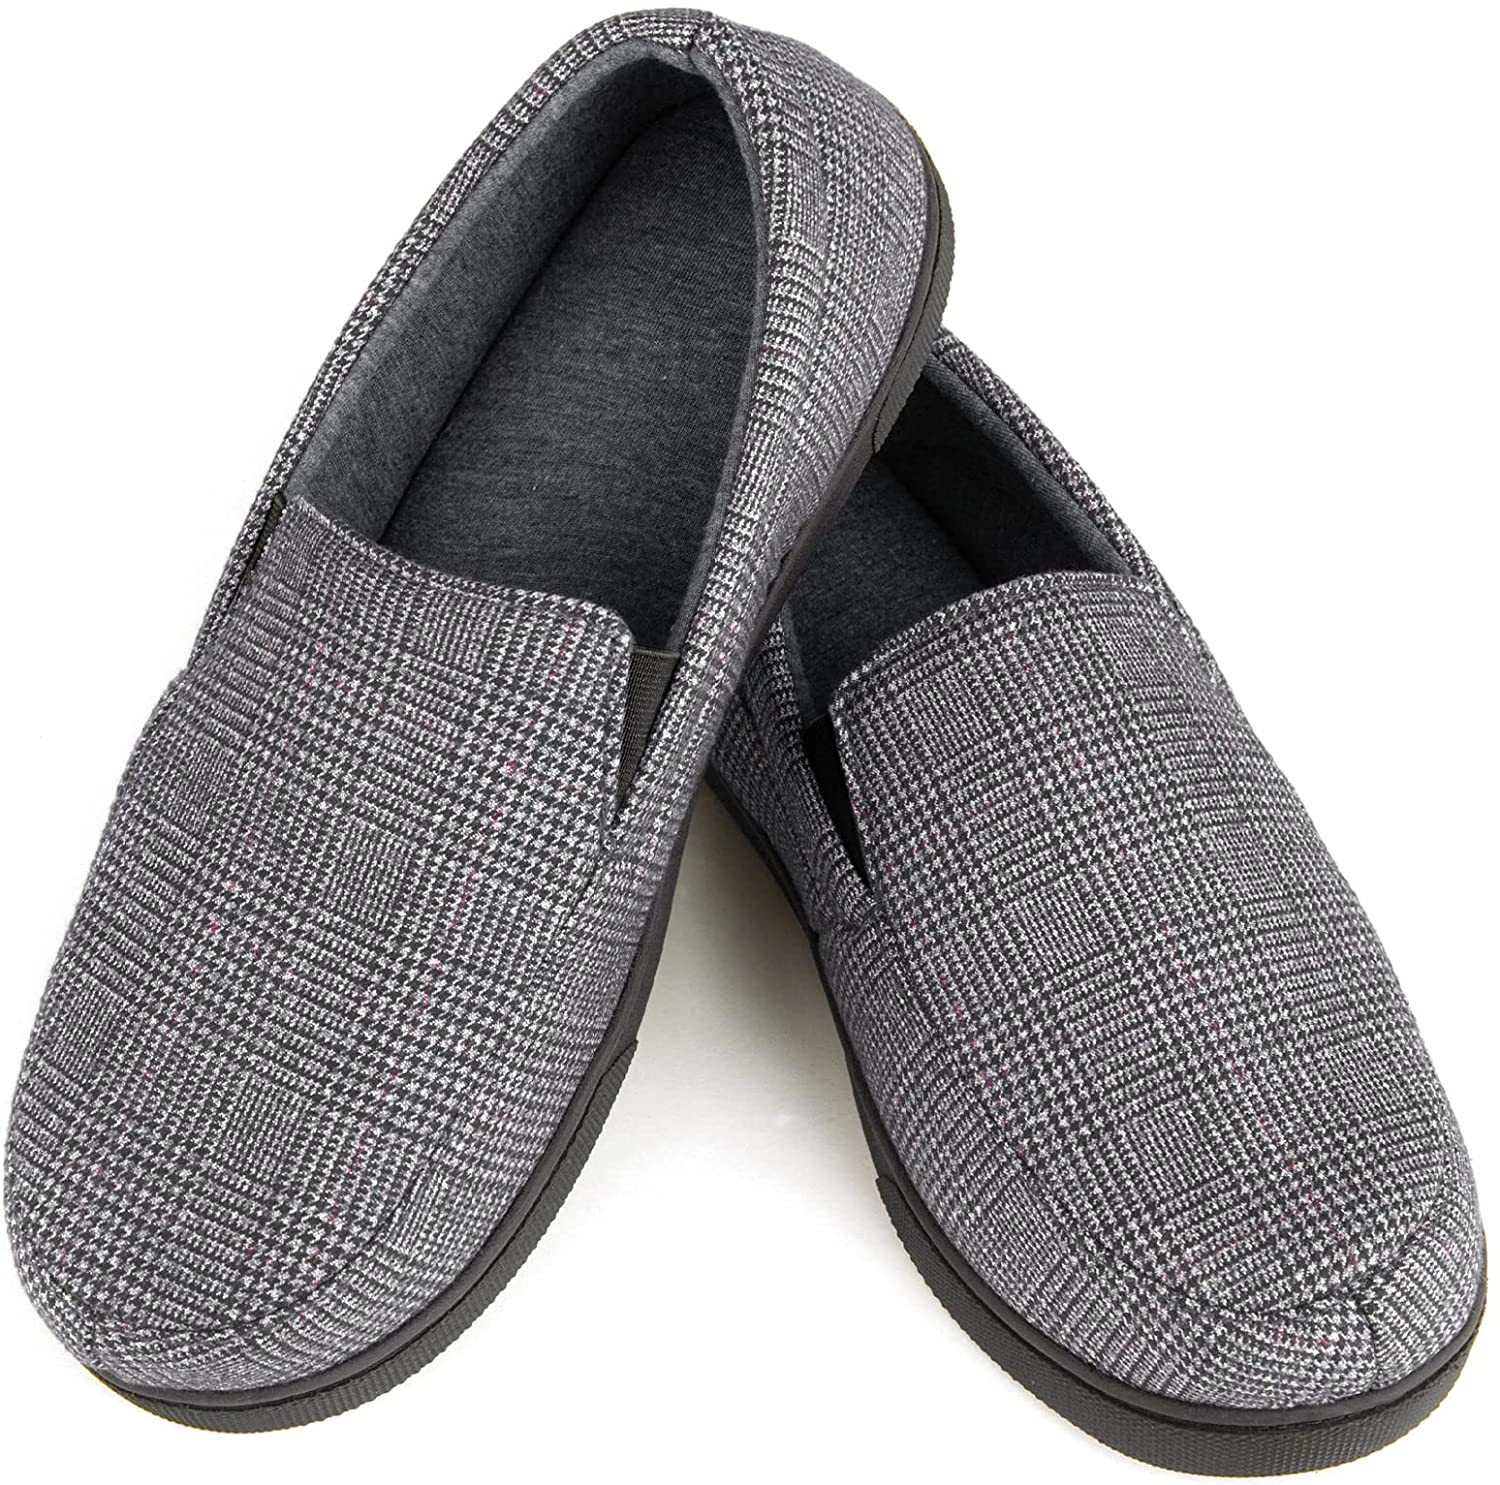 Lightweight Closed Back House Shoes with Anti-Skid Indoor Rubber Sole ZIZOR Men’s Cozy Memory Foam Tartan Slippers 